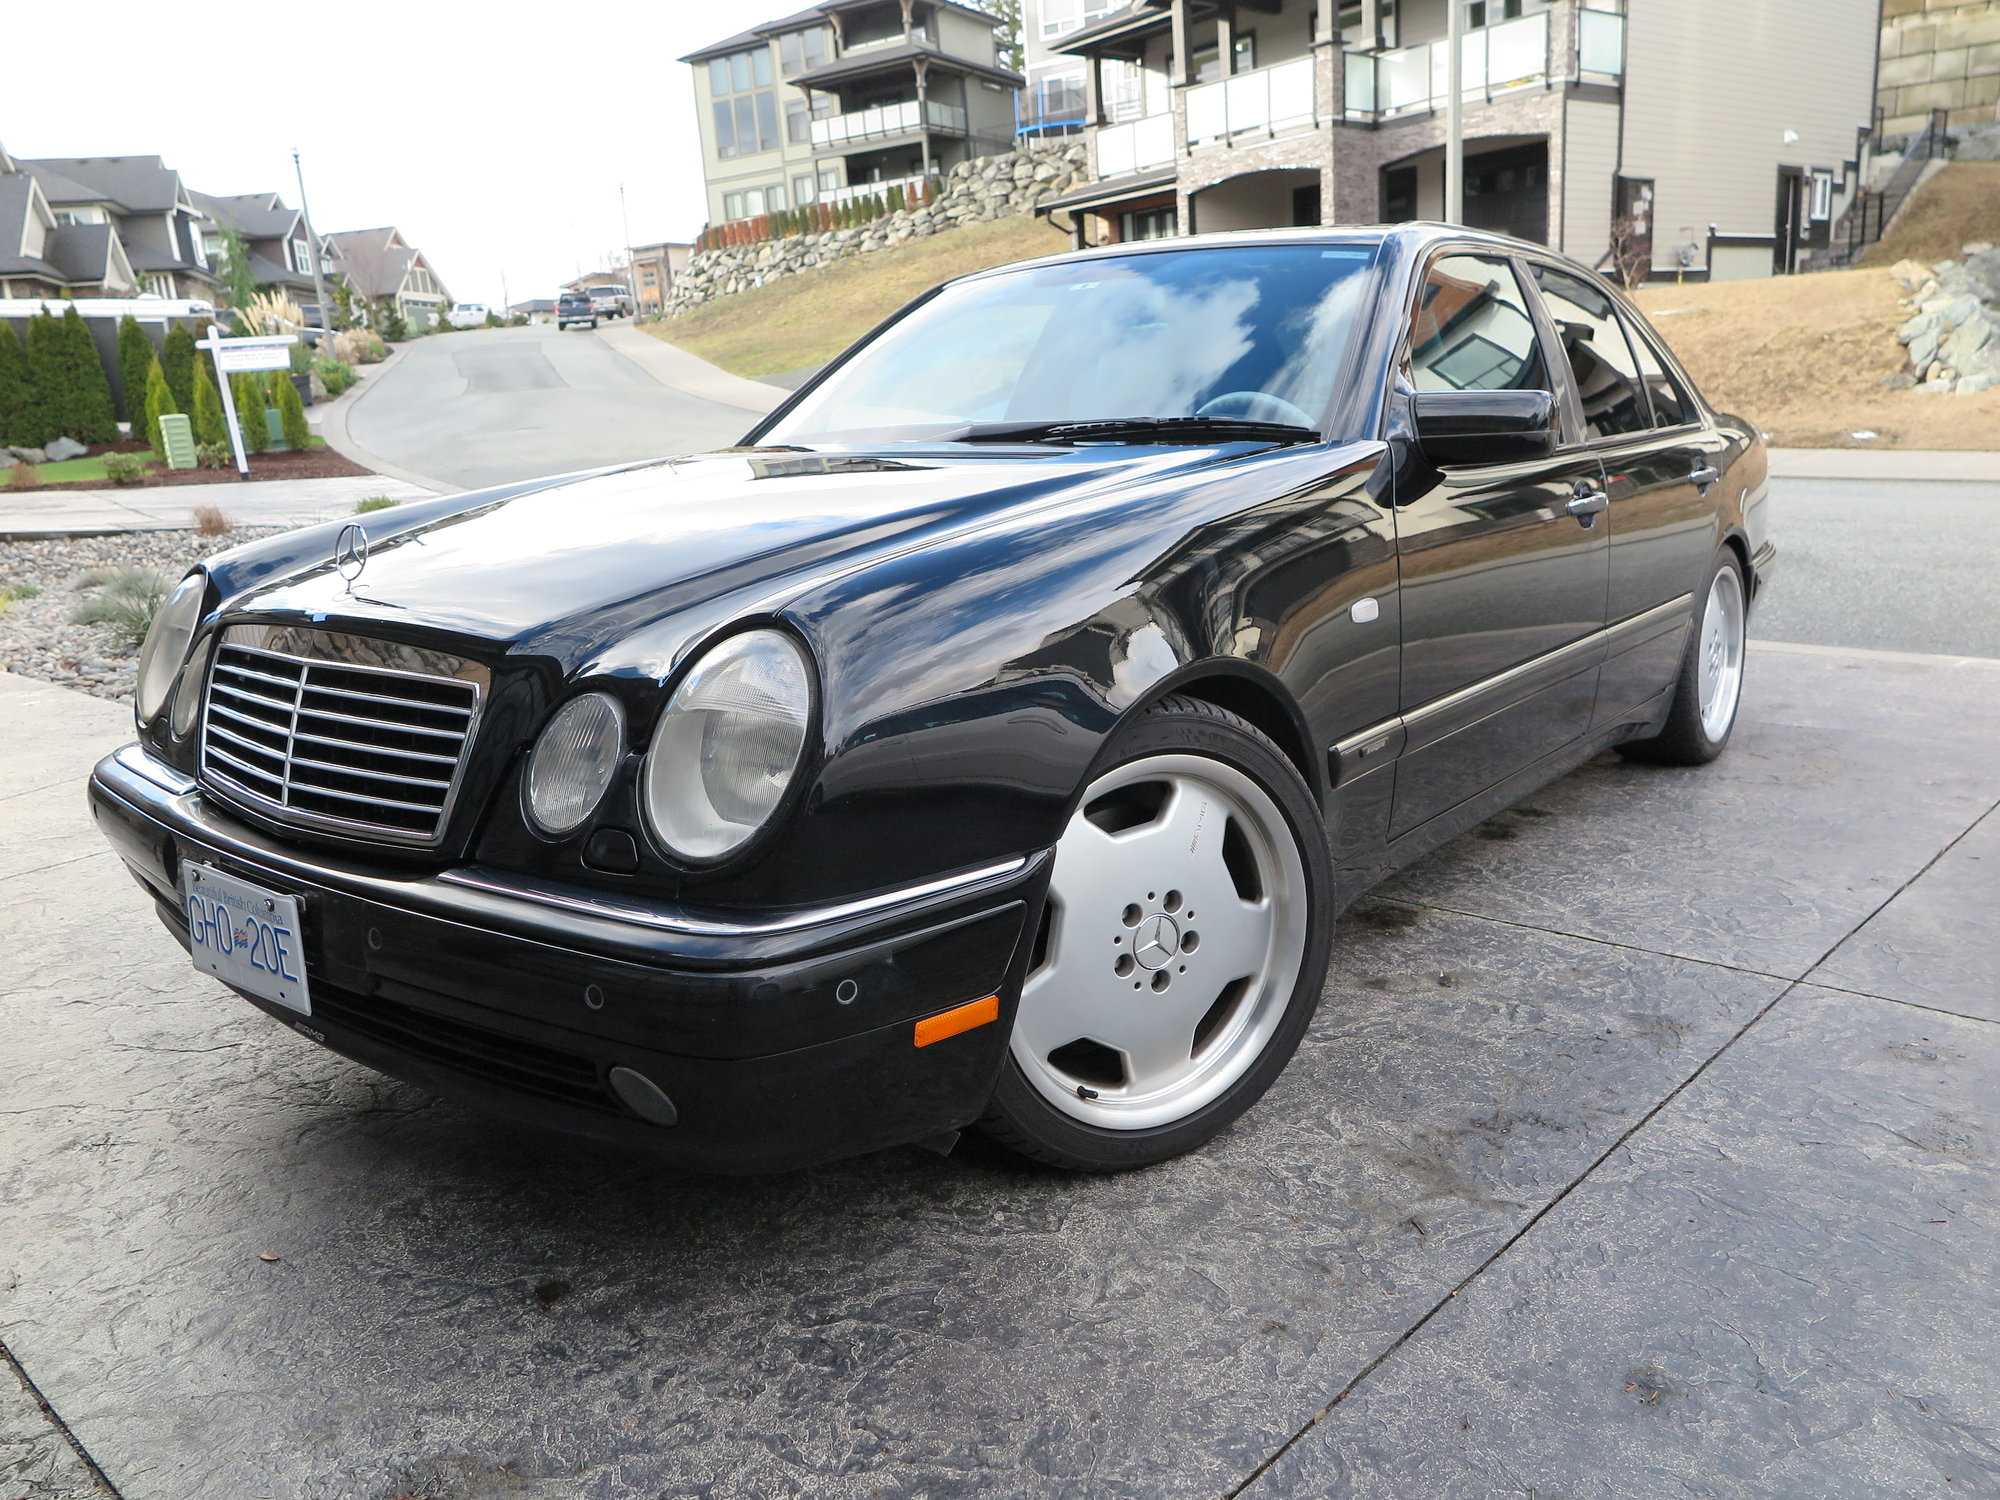 1998 Mercedes-Benz E55 AMG - 1998 E55 AMG 99,600 KM SINCE NEW, 2ND OWNER, ORIGINAL, NO ACCIDENTS - Used - VIN 1A515550 - 99,600 Miles - 8 cyl - 2WD - Automatic - Sedan - Black - Chilliwack, BC V2R0J6, Canada